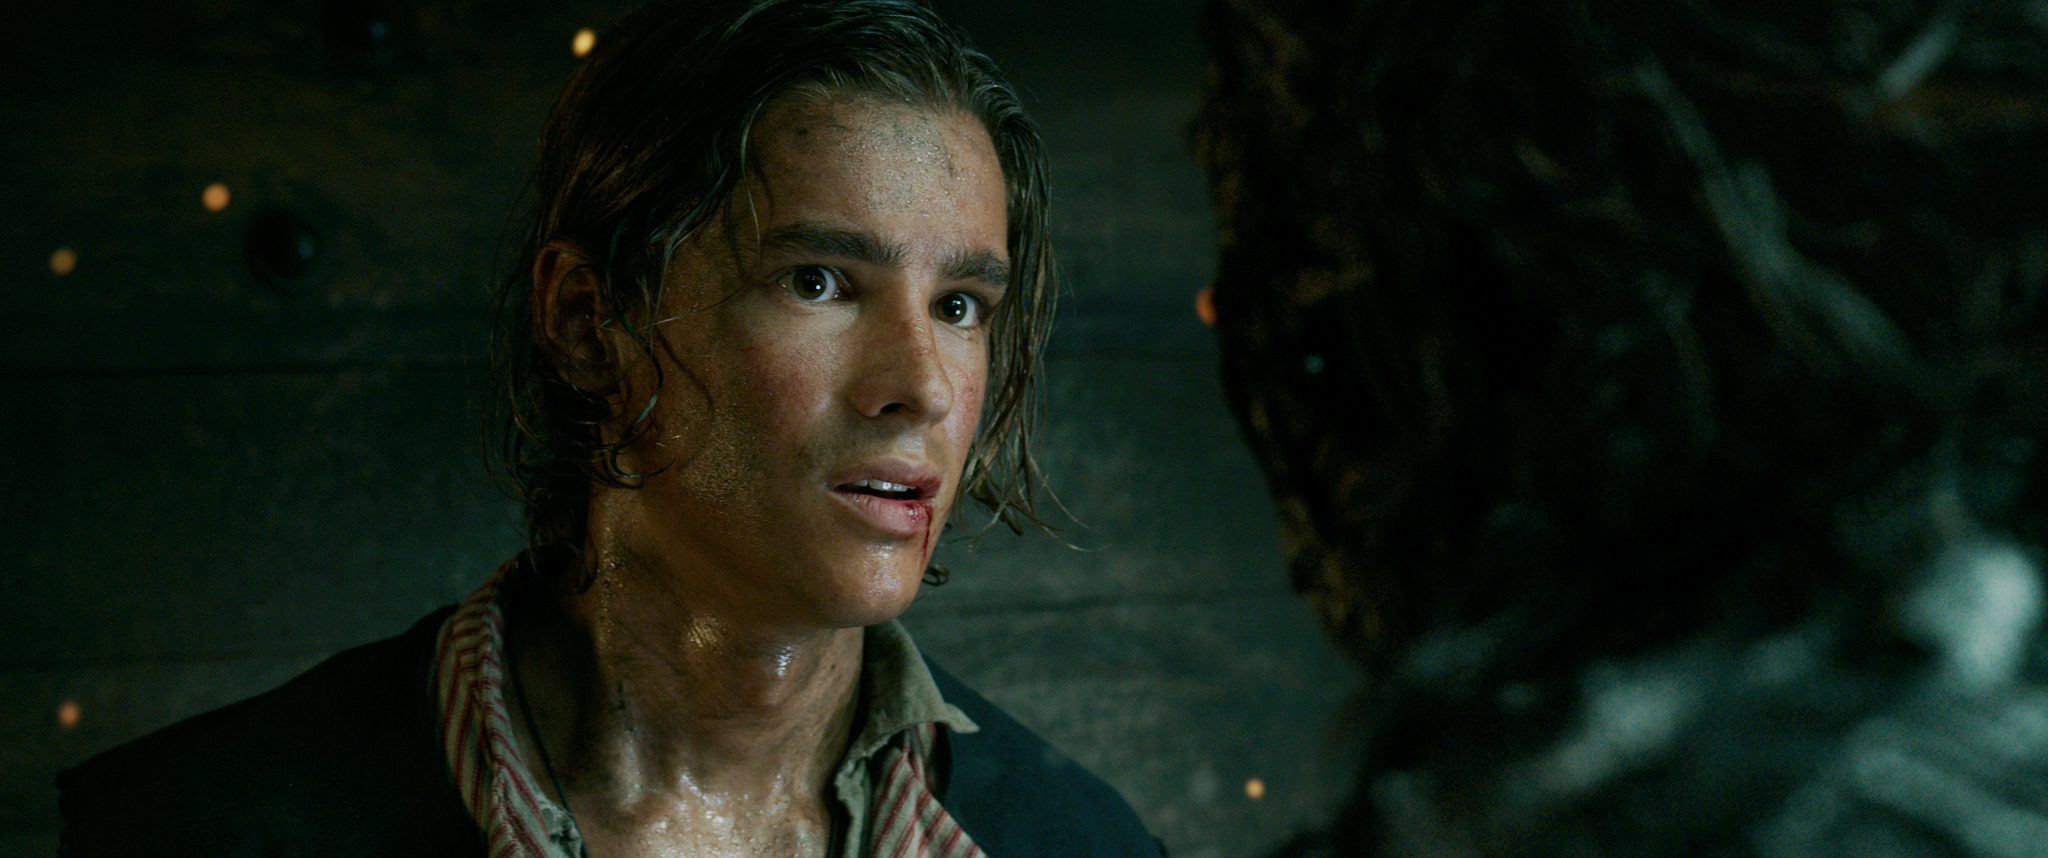 Death Is Coming In The First Trailer For Pirates Of The Caribbean: Dead Men Tell No Tales